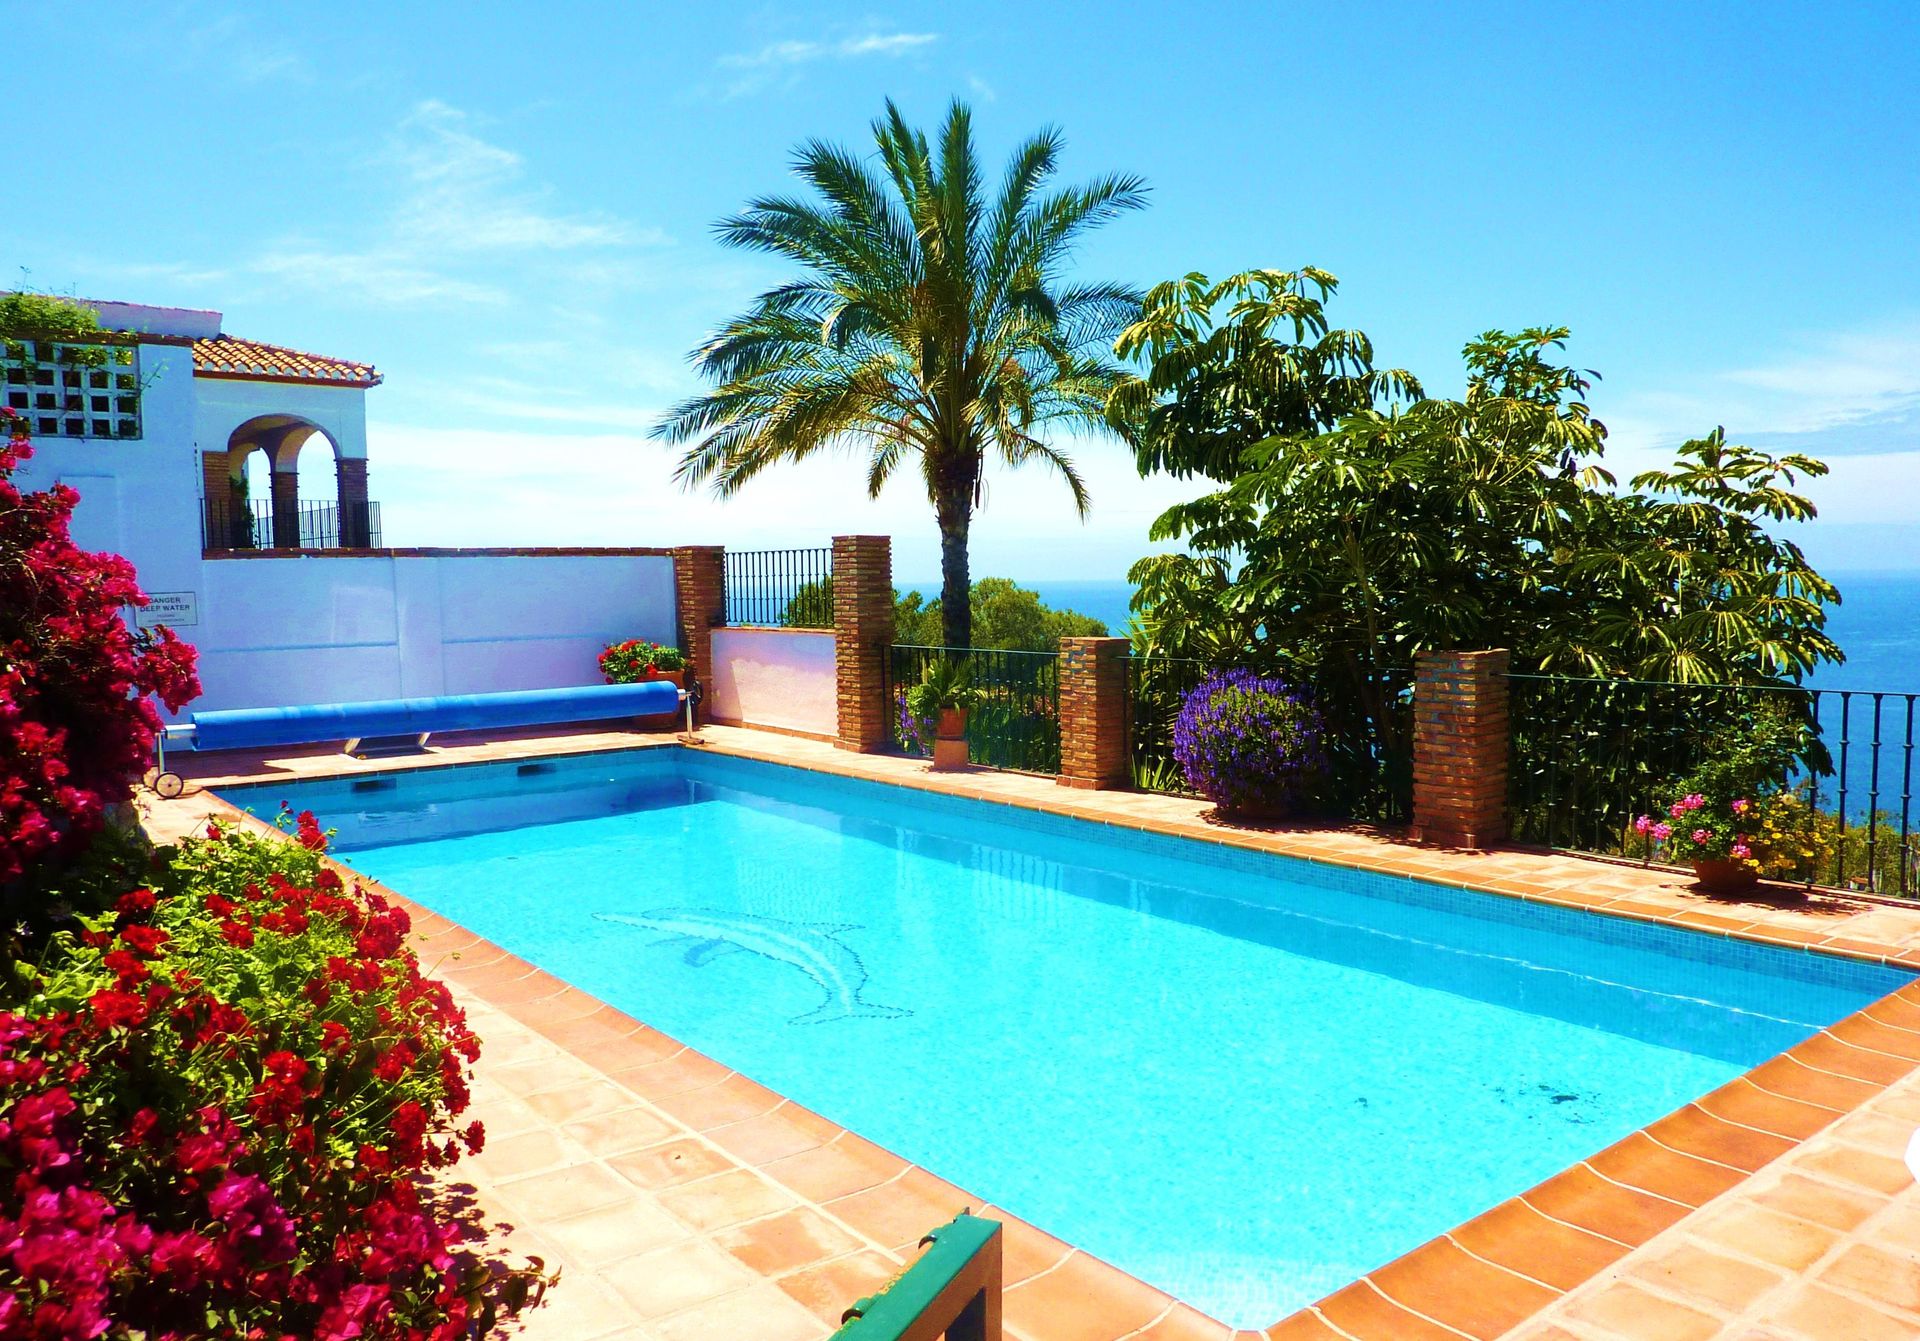 Discover our wide choice of family-friendly villas with private pools